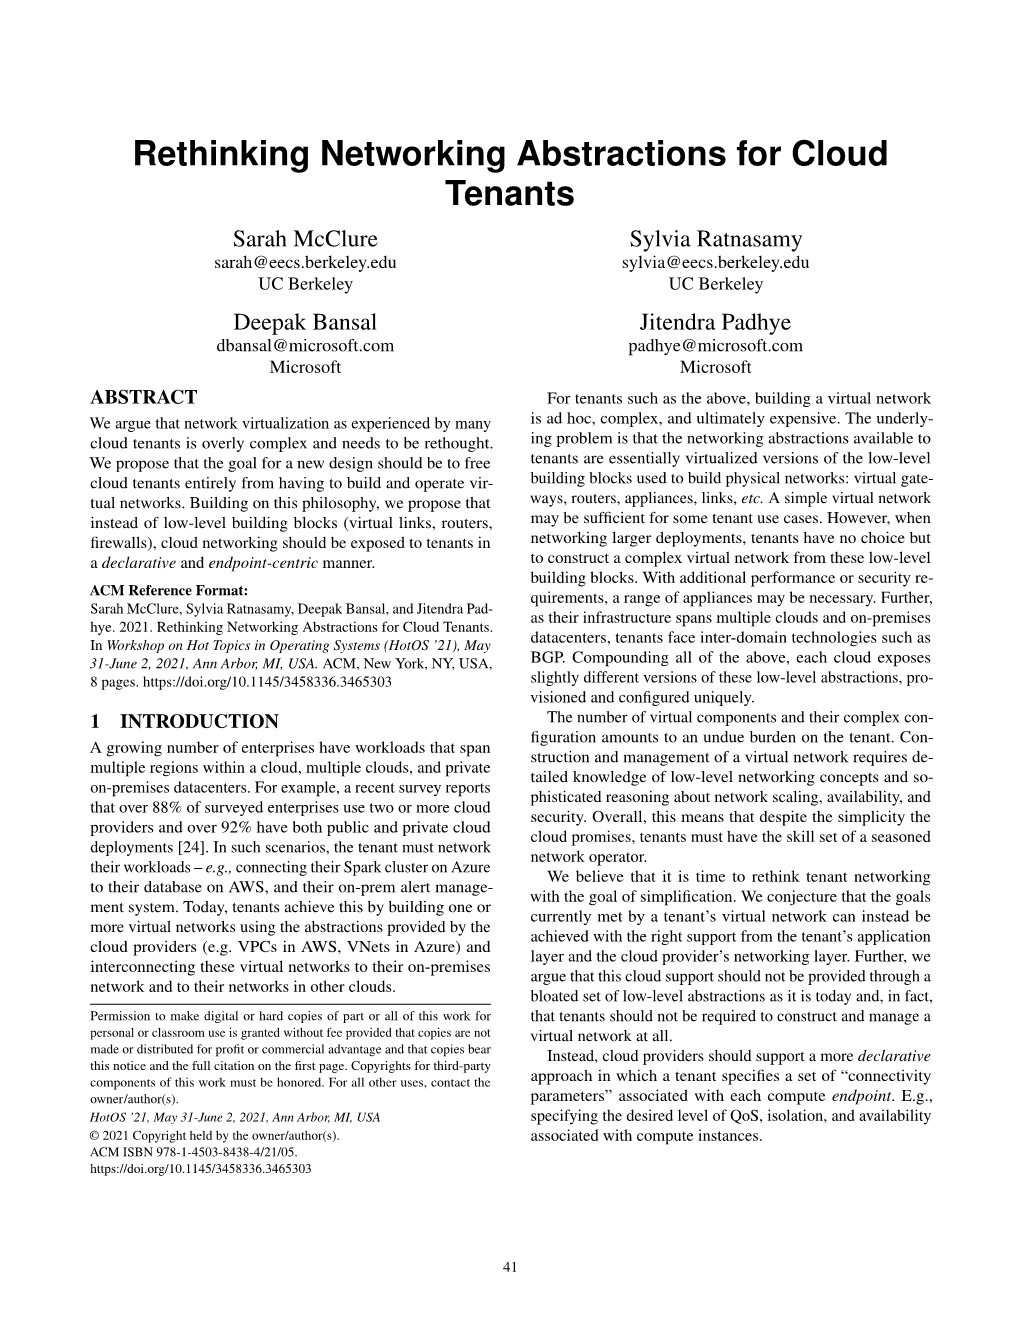 Rethinking Networking Abstractions for Cloud Tenants